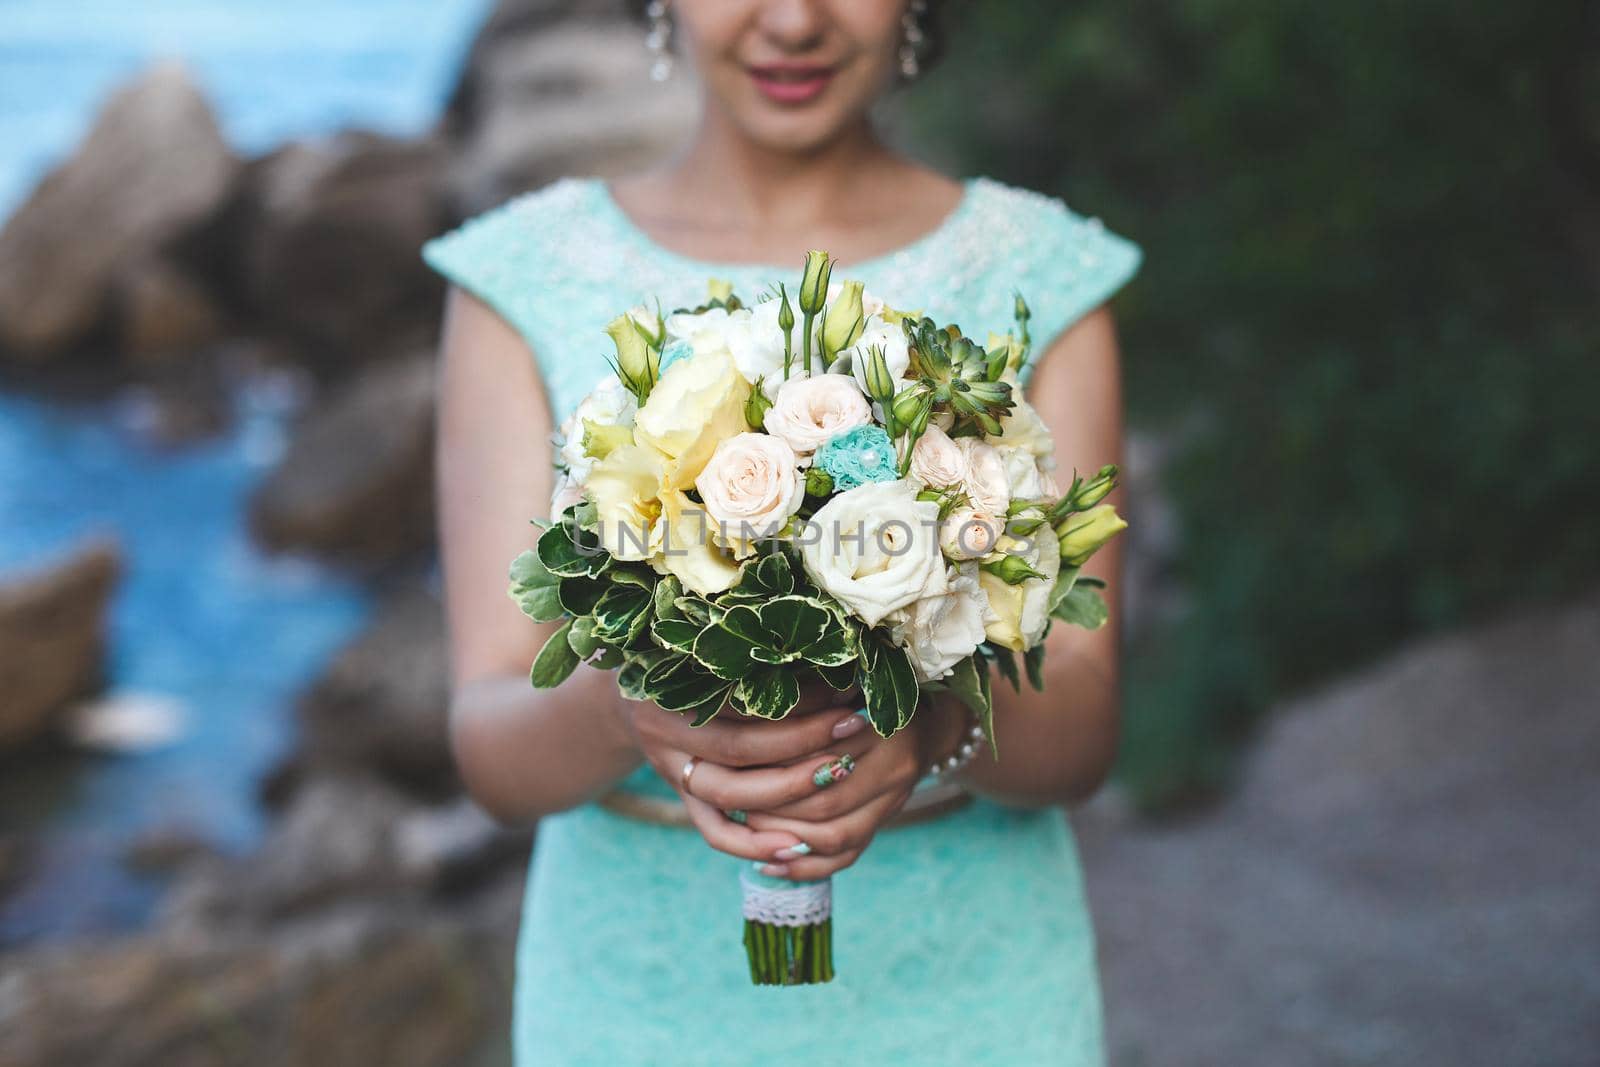 Bride in nature in the mountains near the water. Dress color Tiffany. Bride posing with bouquet.